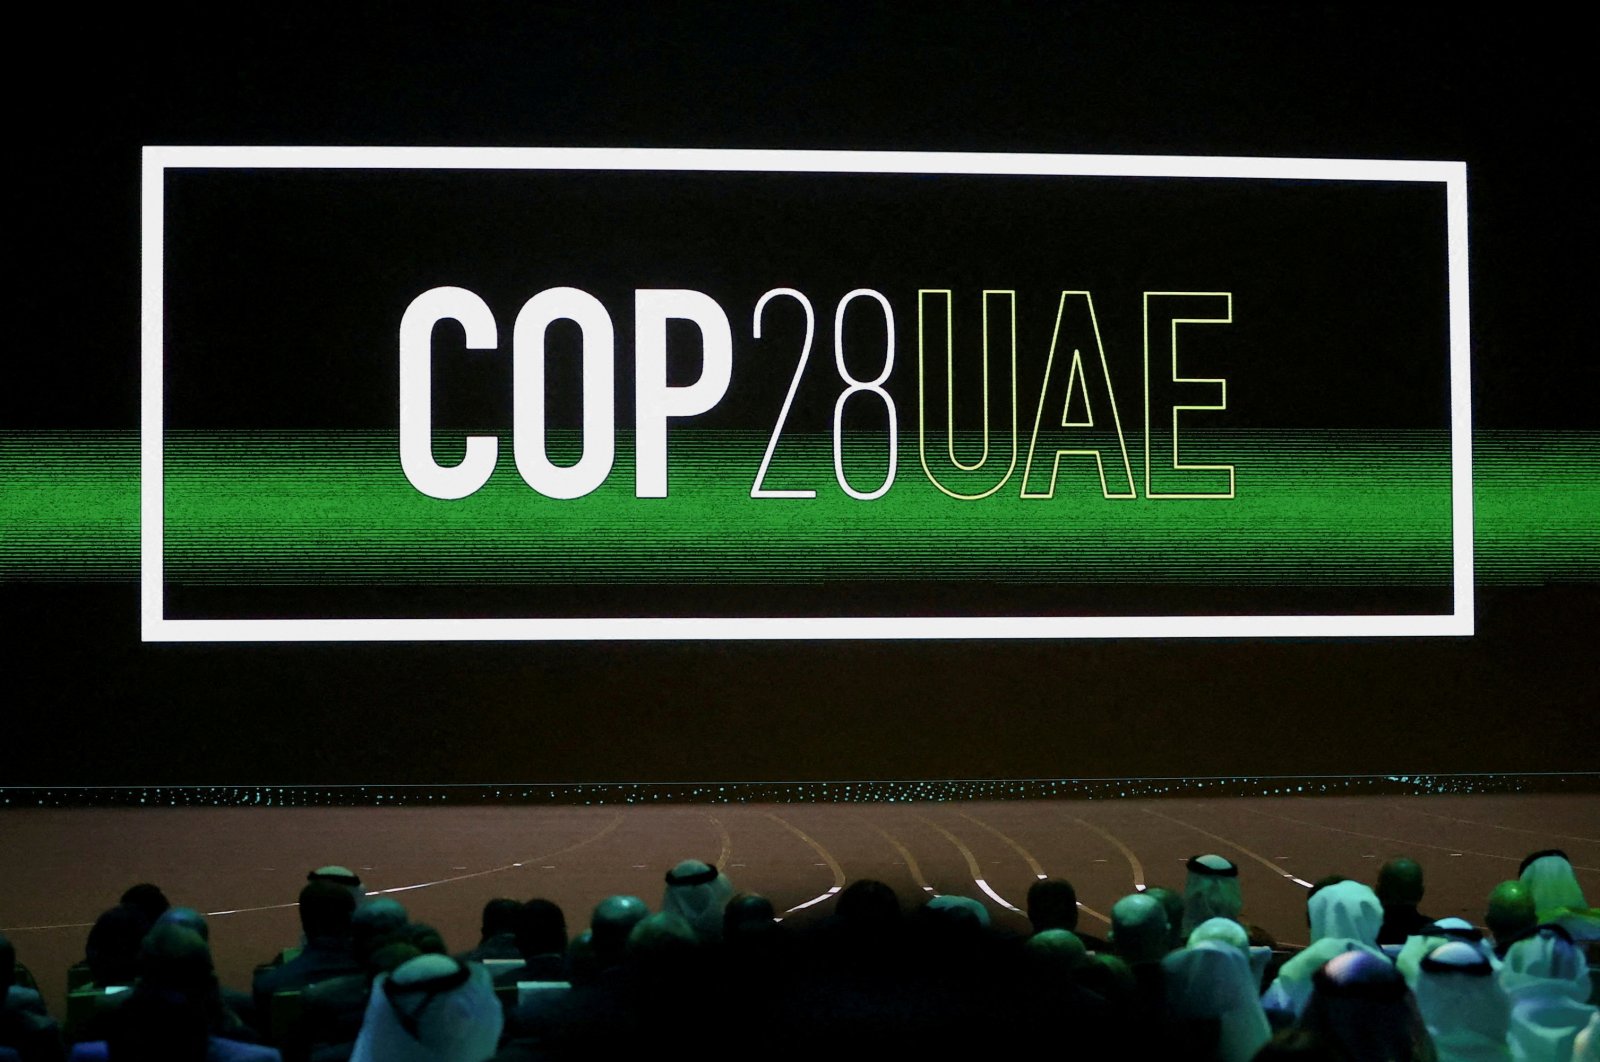 The &quot;COP28 UAE&quot; logo is displayed on the screen during the opening ceremony of Abu Dhabi Sustainability Week (ADSW) under the theme of &quot;United on Climate Action Toward COP28,&quot; in Abu Dhabi, UAE, Jan. 16, 2023. (Reuters Photo)